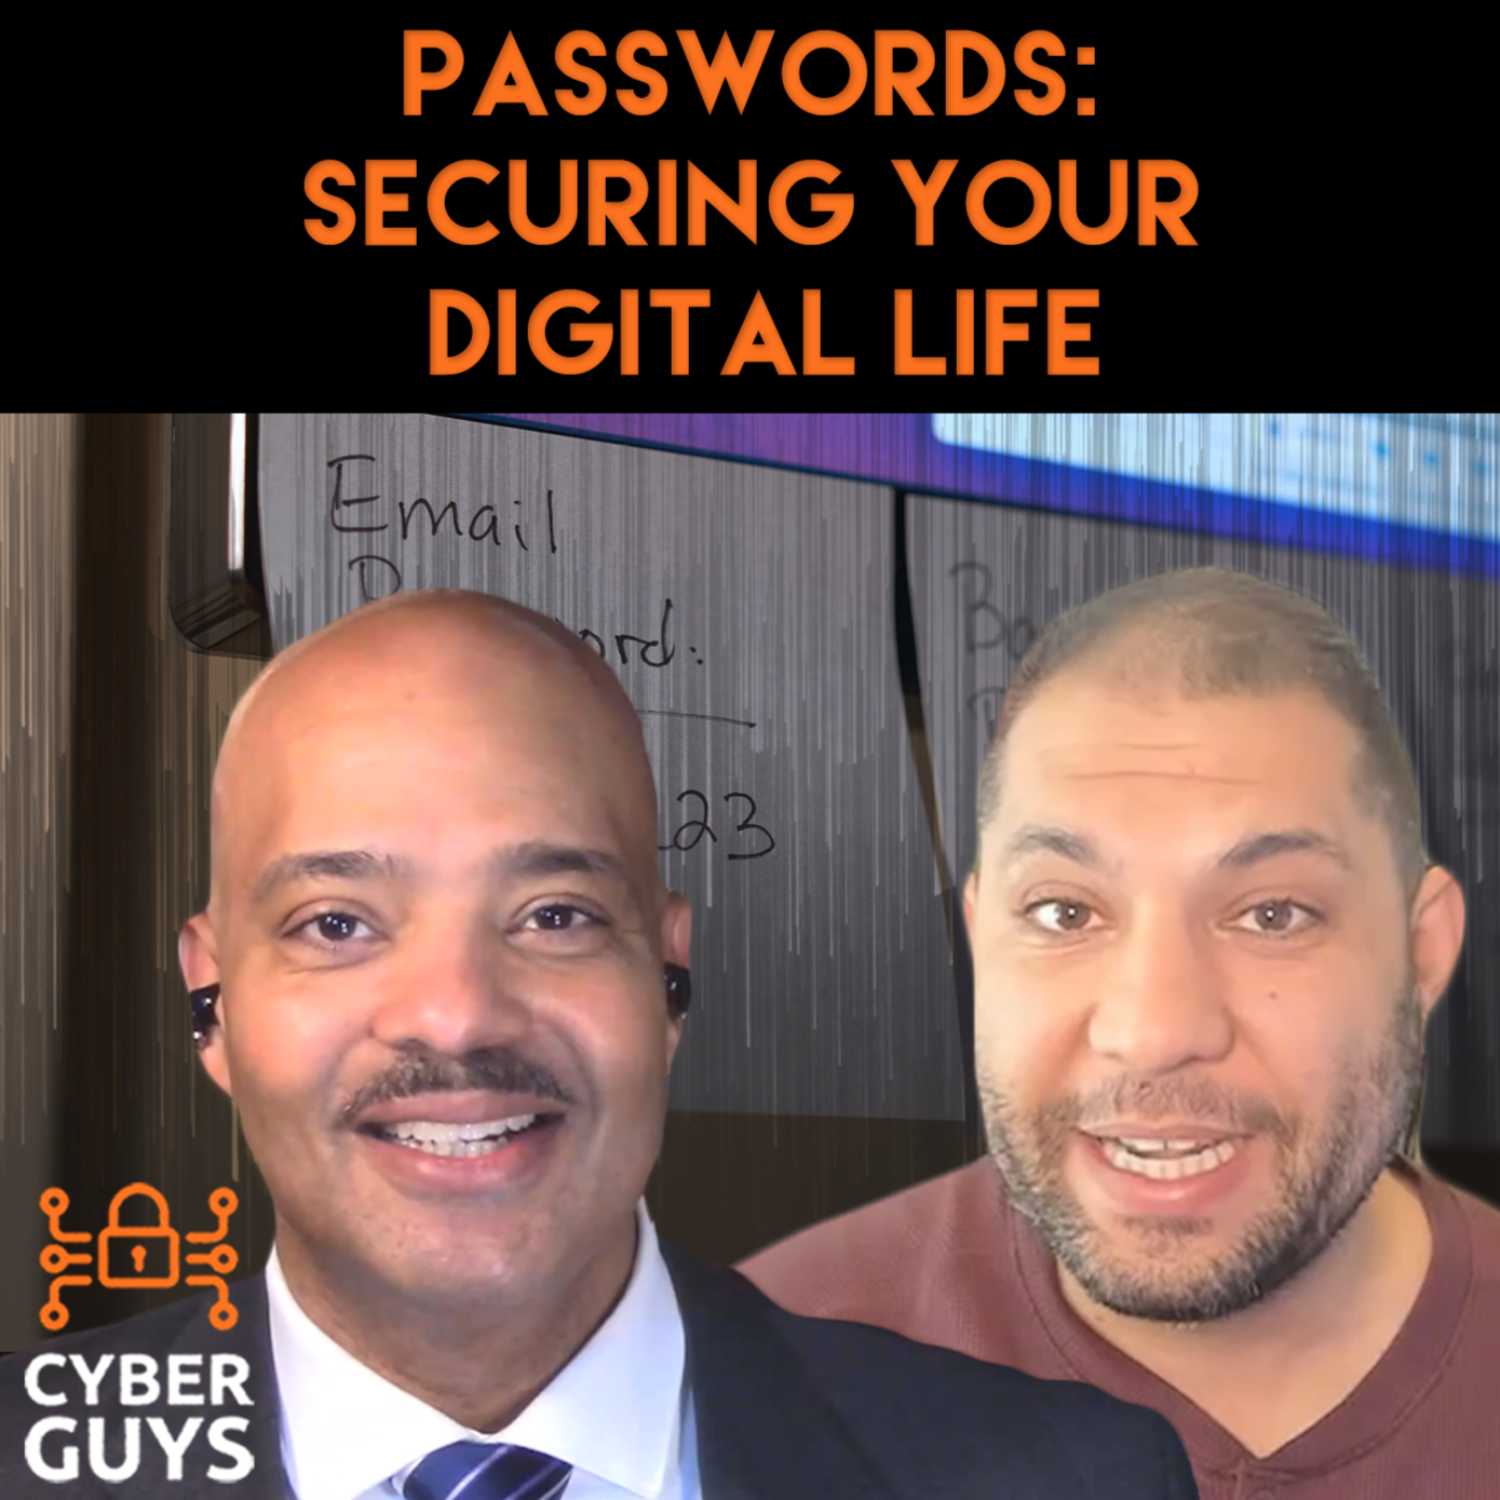 Passwords: Securing Your Digital Life